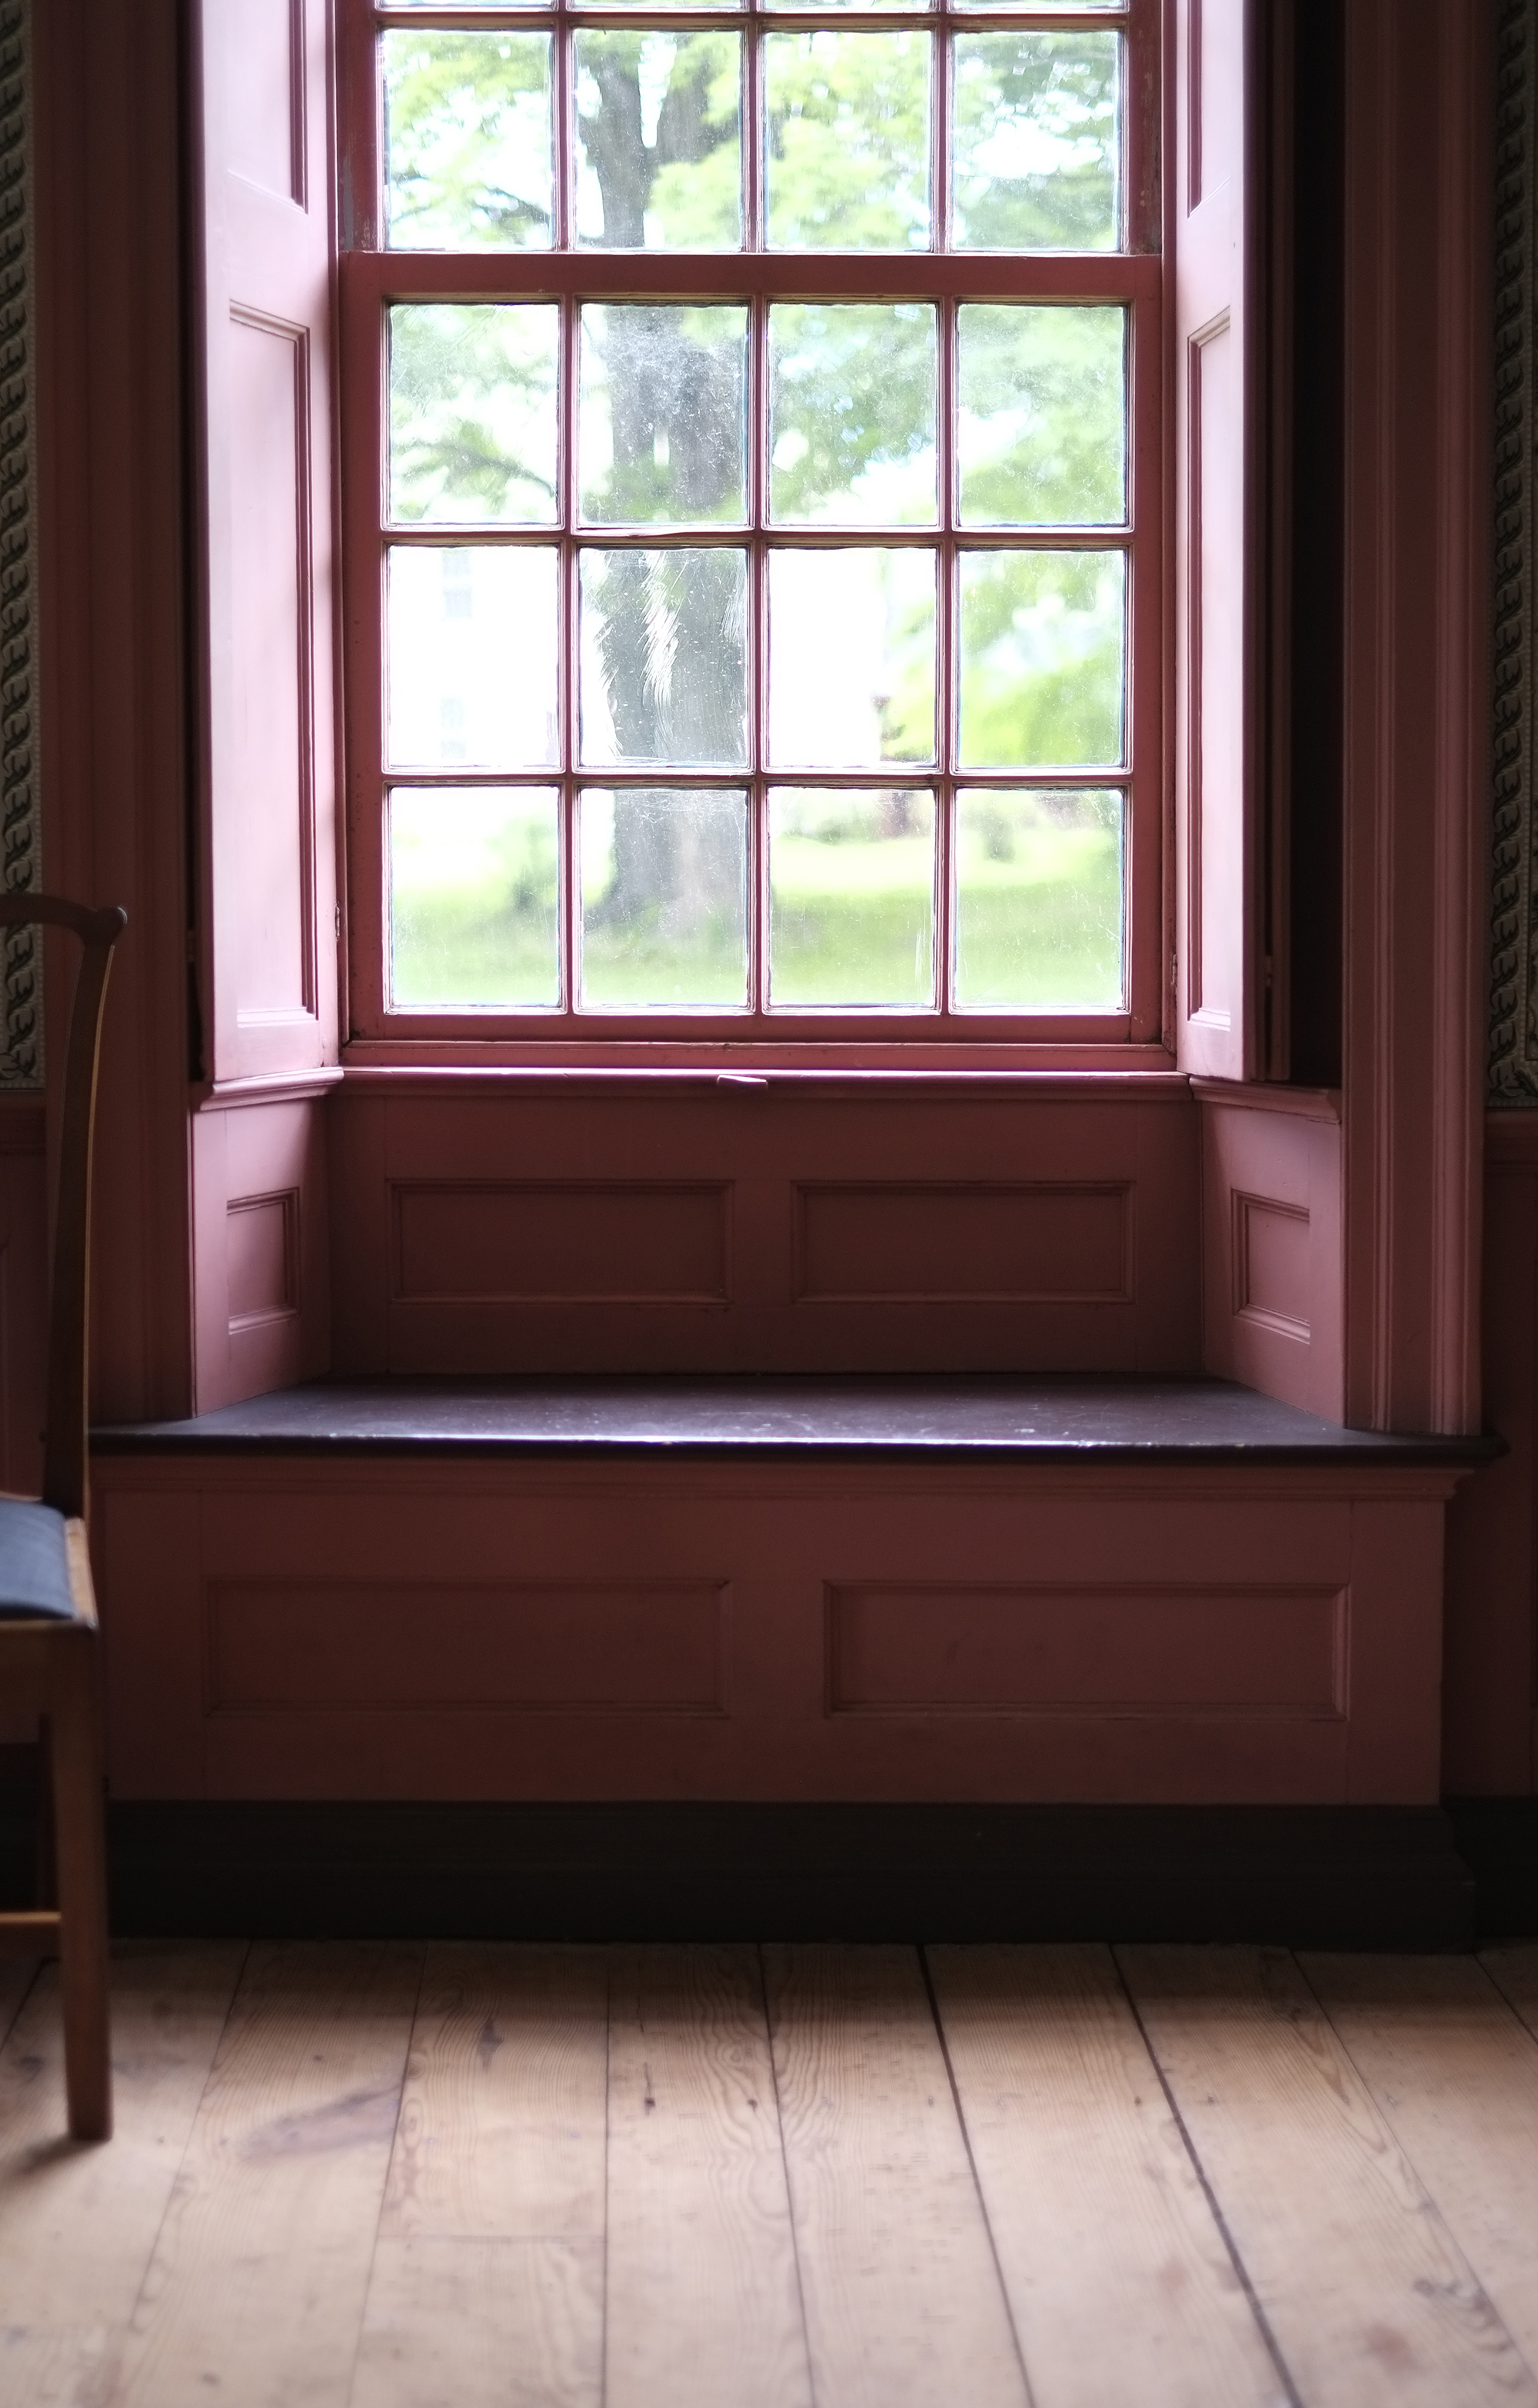 Window seat and interior shutters in the library room at Wells-Thorn House.